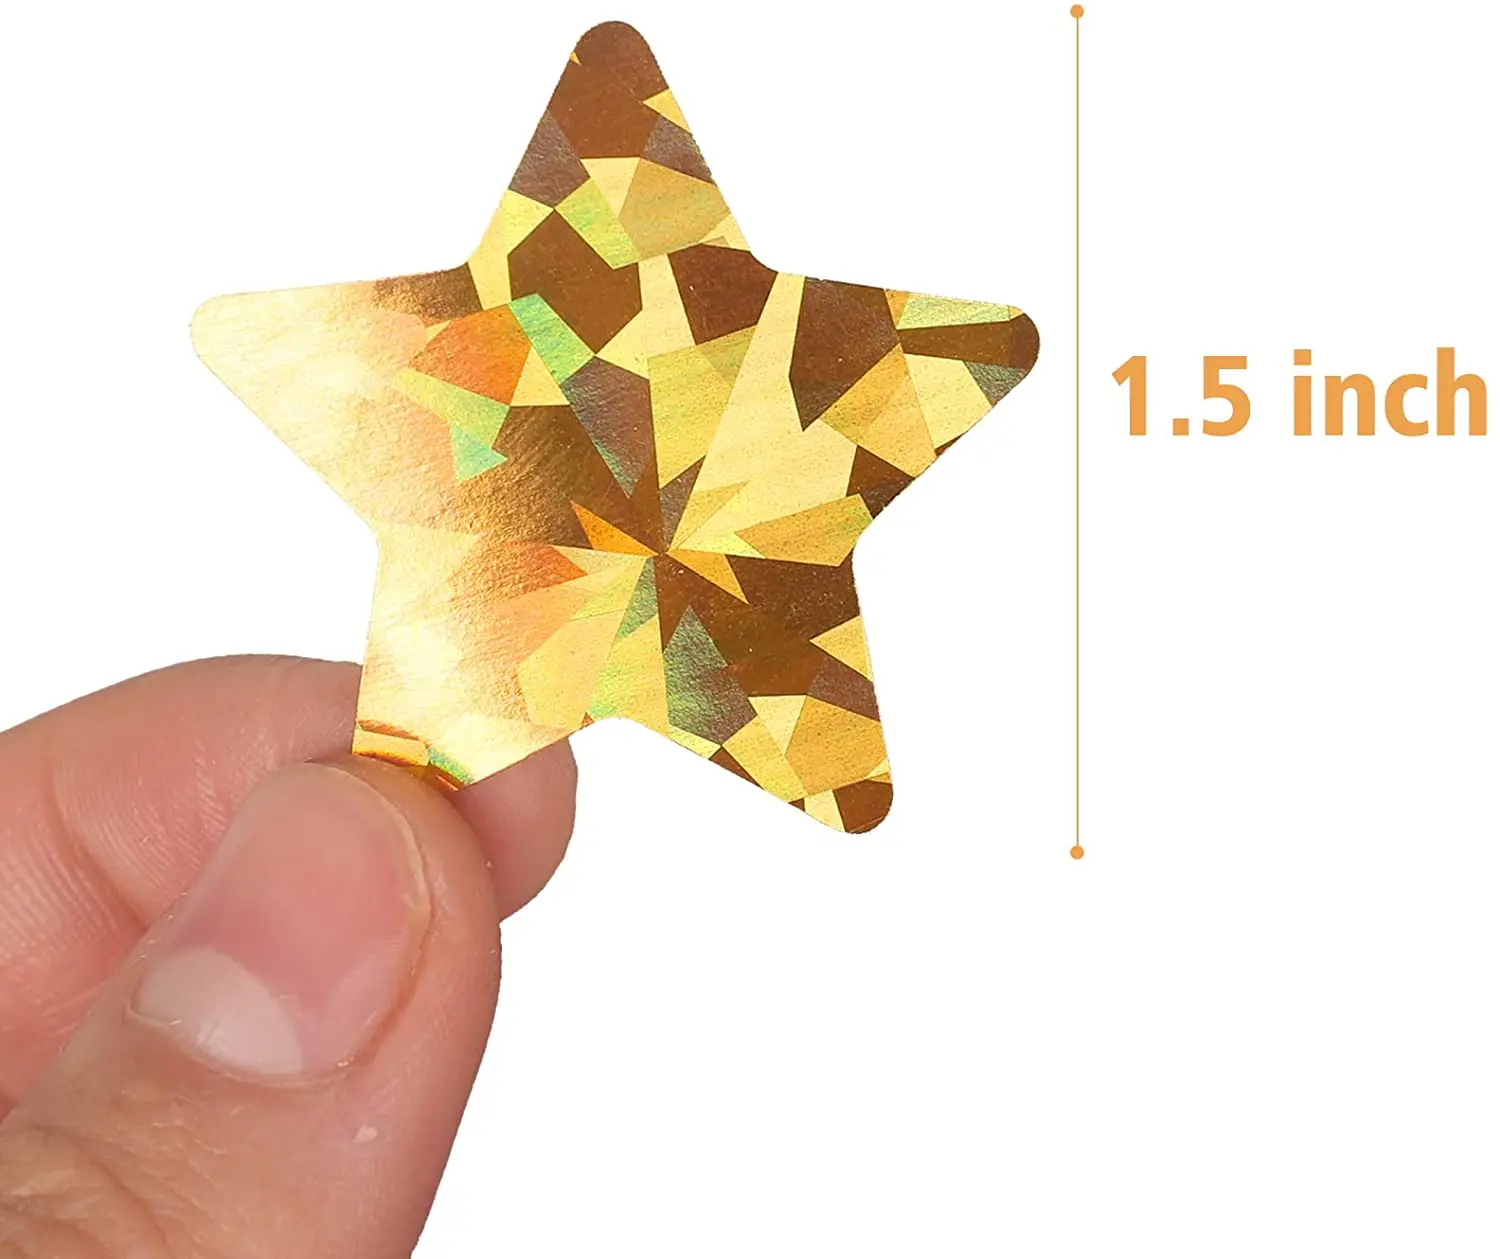 C gold star stickers for kids reward 100 500pcs fa star stickers labels for wall crafts thumb200